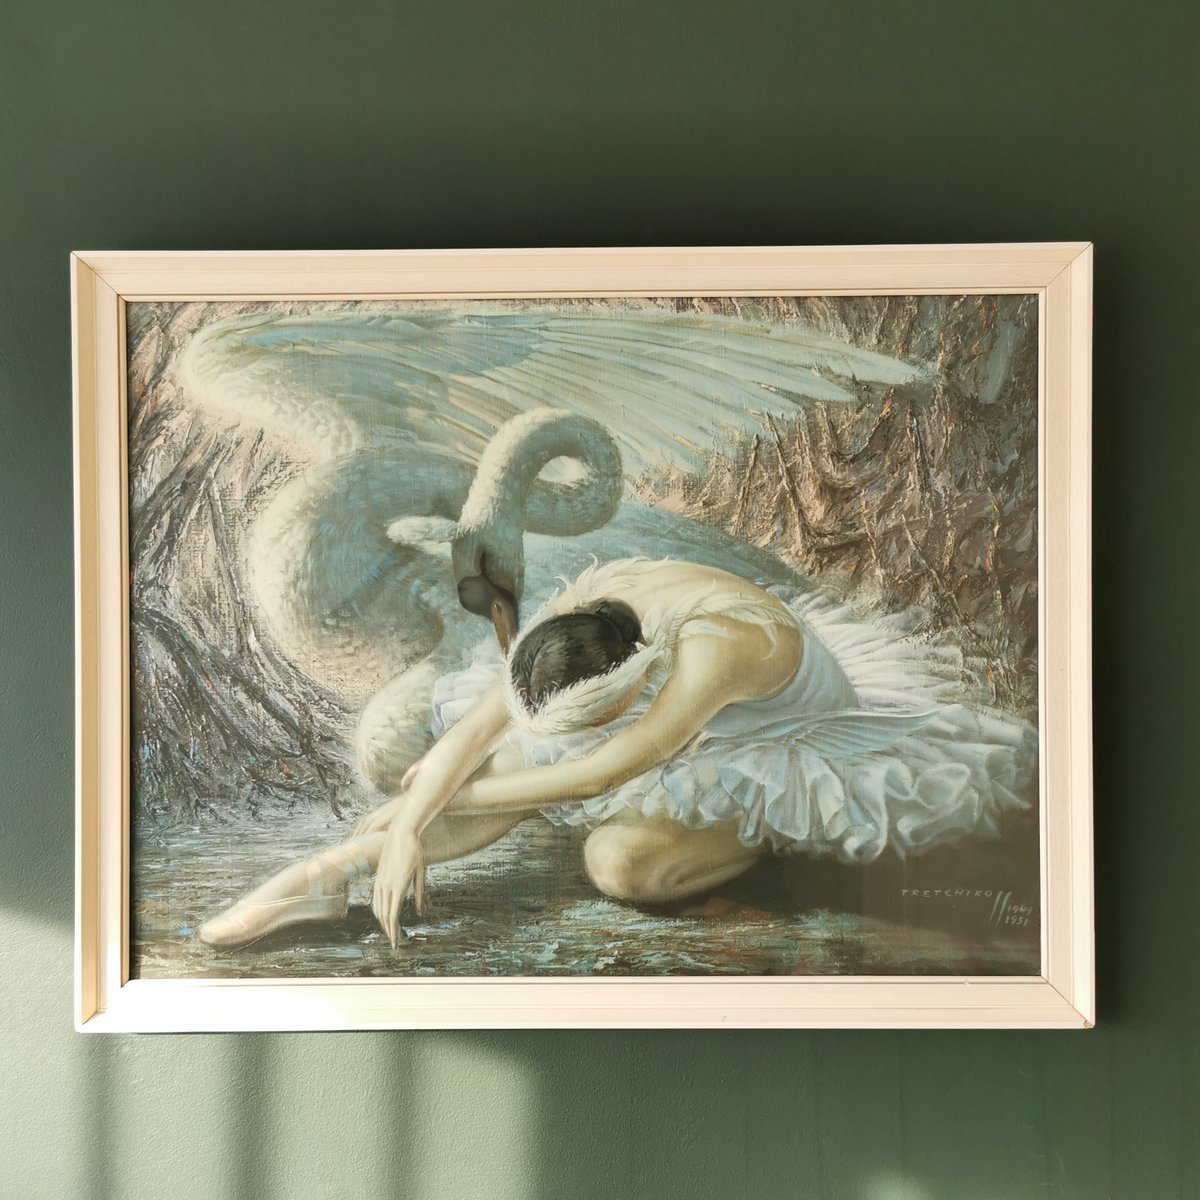 Image of 'The Dying Swan' by Vladimir Tretchikoff, Mid-Century Iconic Vintage Print